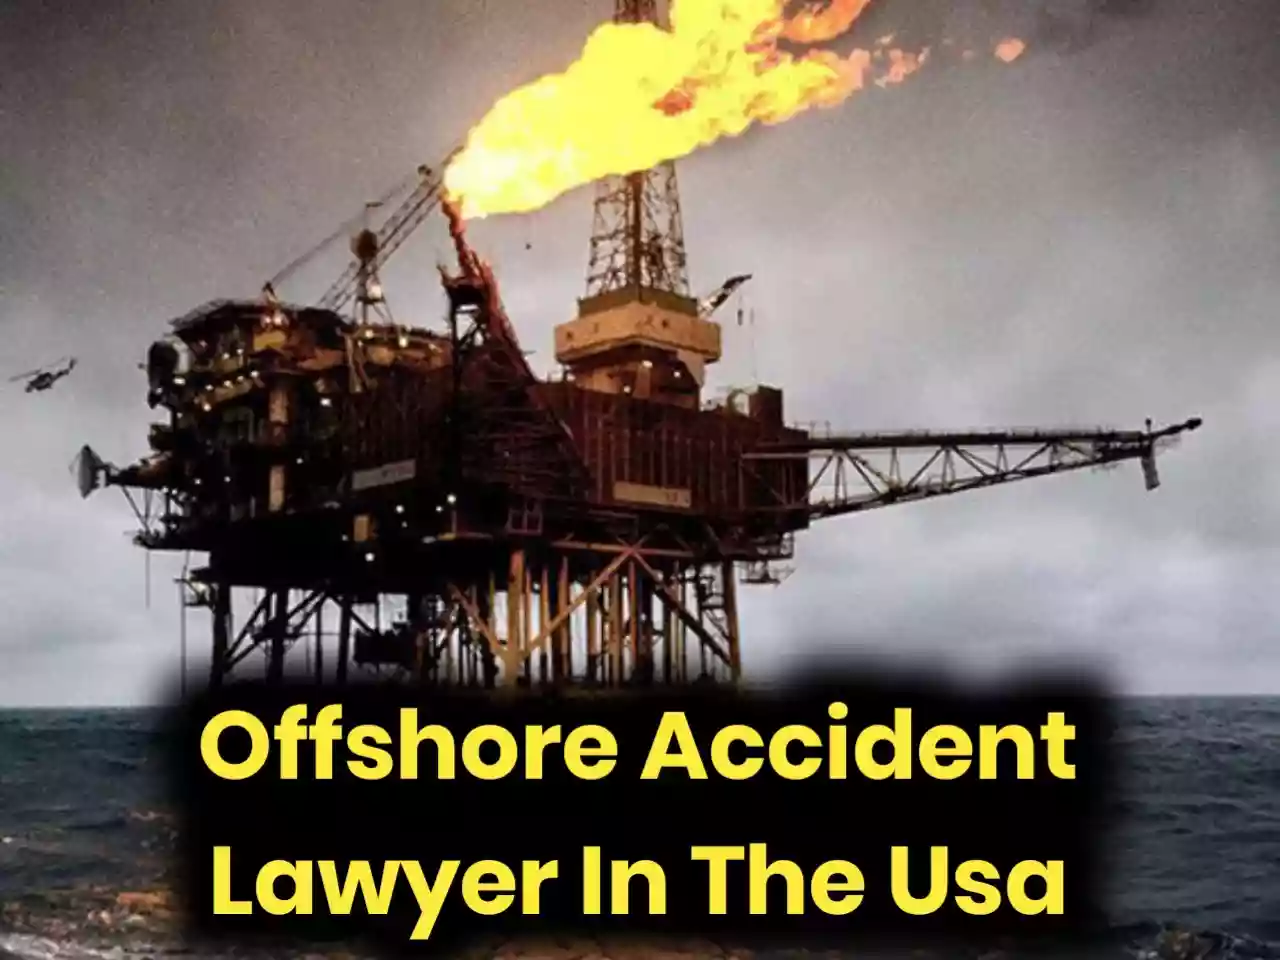 Offshore Accident Lawyer In The Usa. - YourSelfStatus